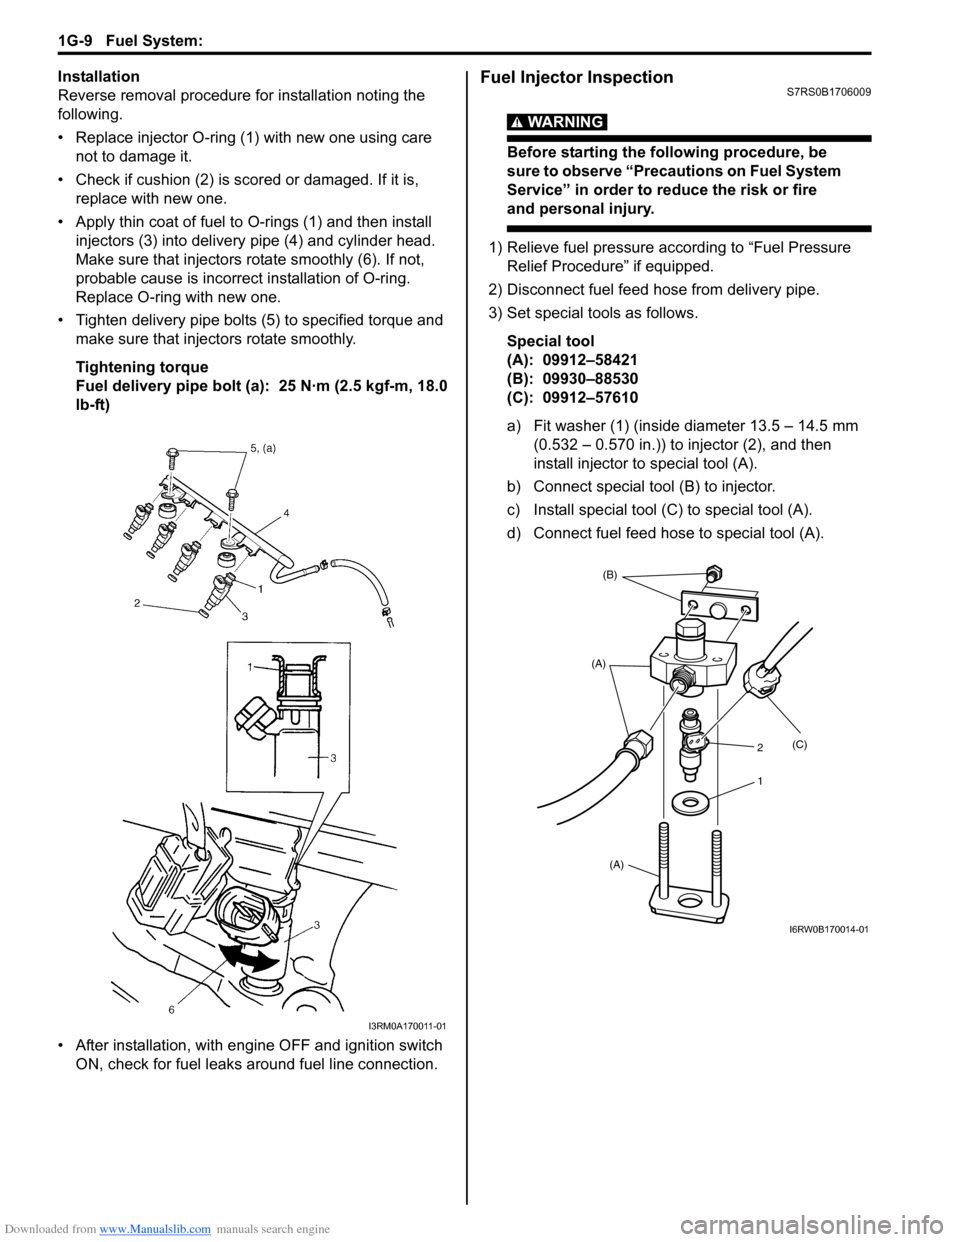 SUZUKI SWIFT 2006 2.G Service Workshop Manual Downloaded from www.Manualslib.com manuals search engine 1G-9 Fuel System: 
Installation
Reverse removal procedure for installation noting the 
following.
• Replace injector O-ring (1) with new one 